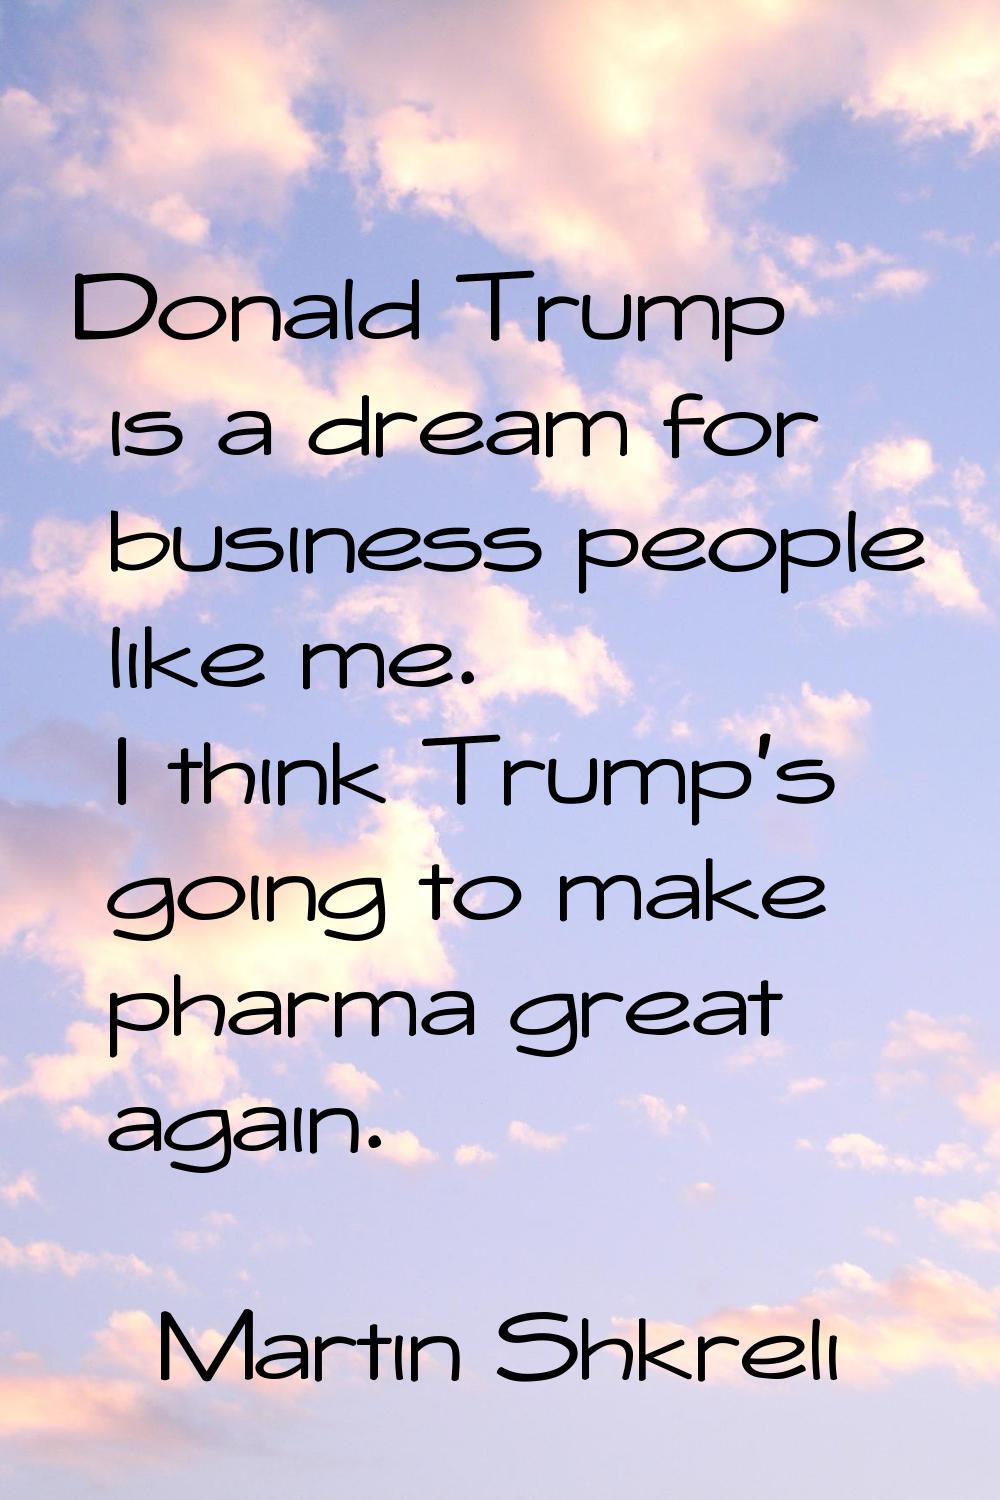 Donald Trump is a dream for business people like me. I think Trump's going to make pharma great aga